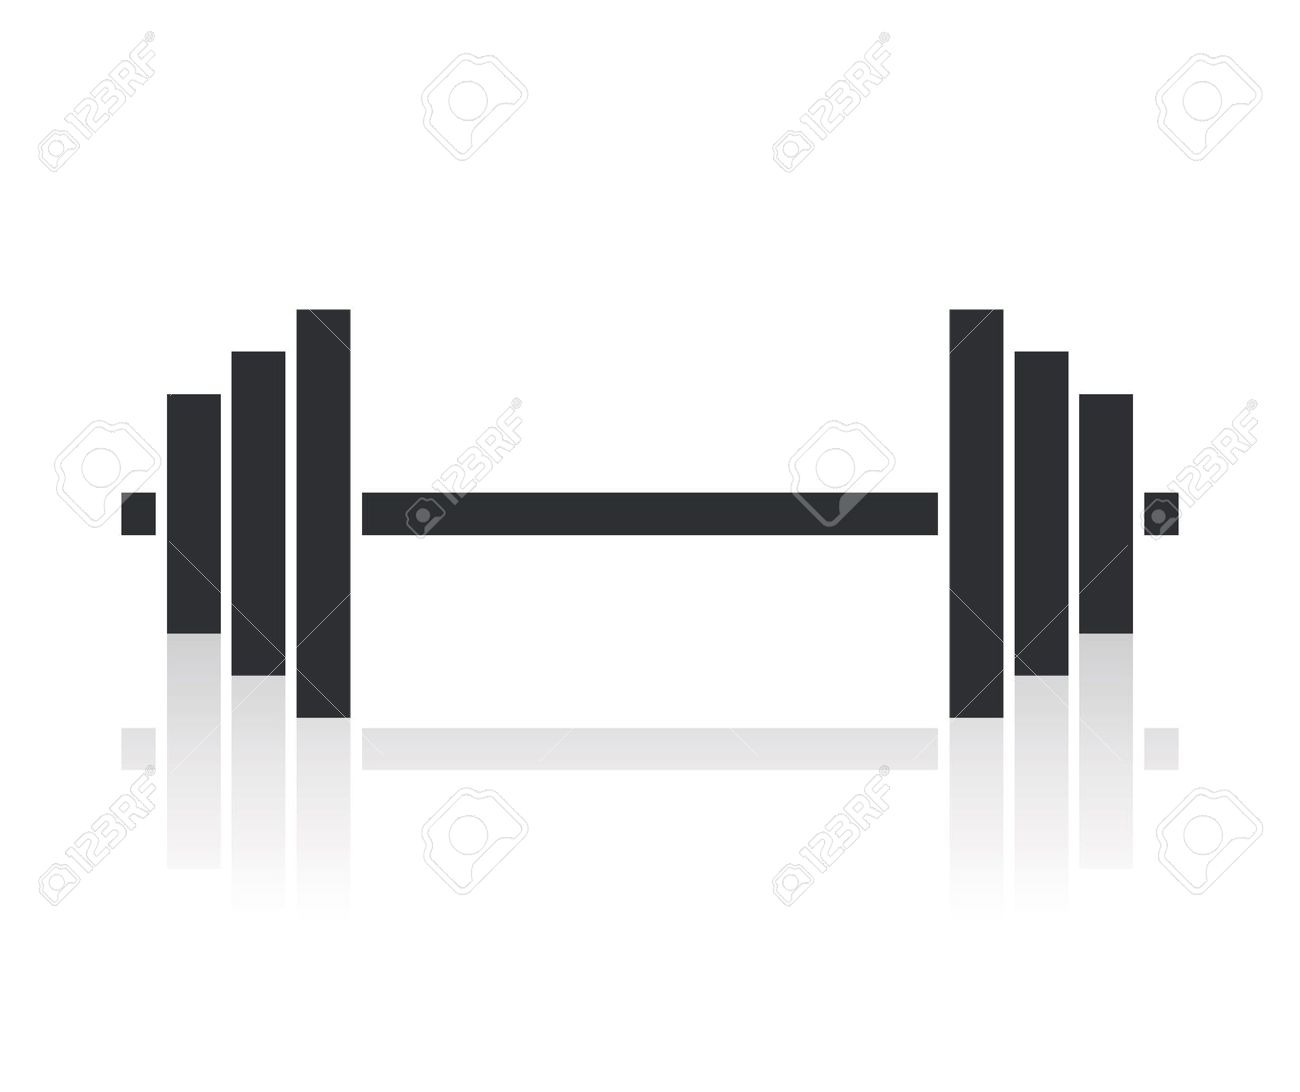 Barbell Illustrations and Cli